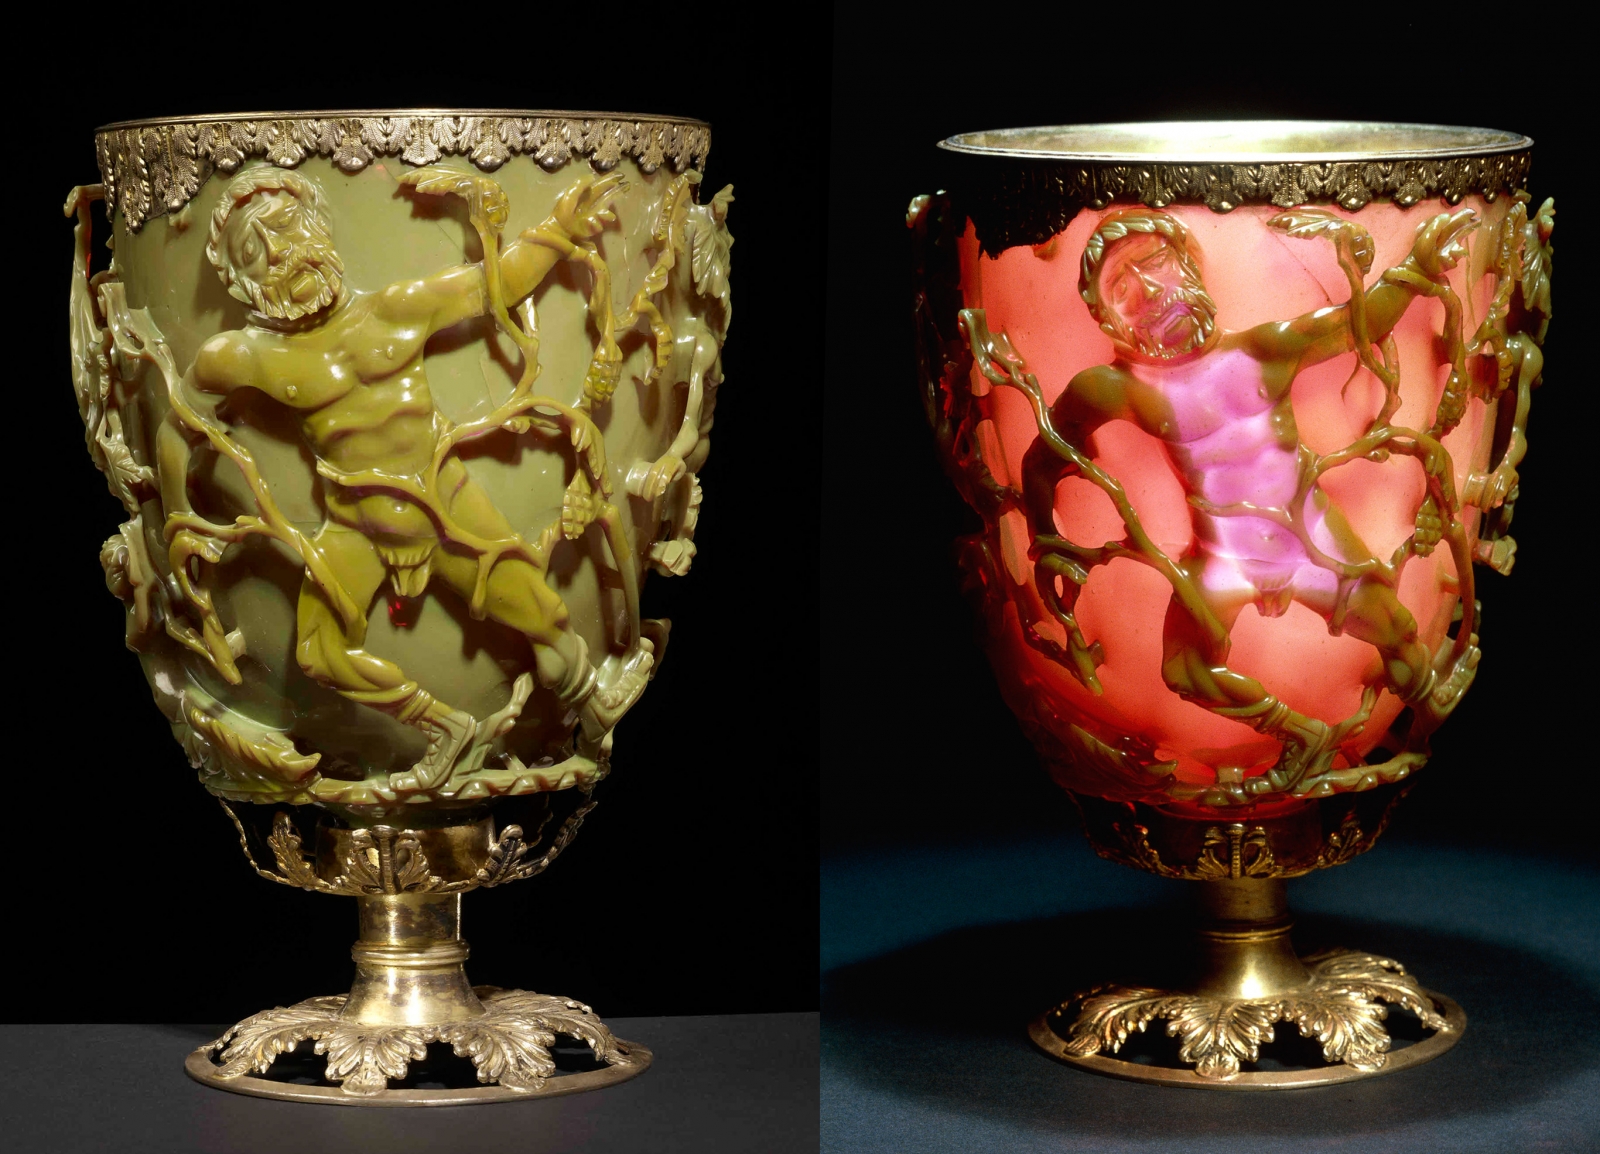 Romans Used Nanotechnology to Turn Lycurgus Cup From Green to Red 1,600 Years Ago